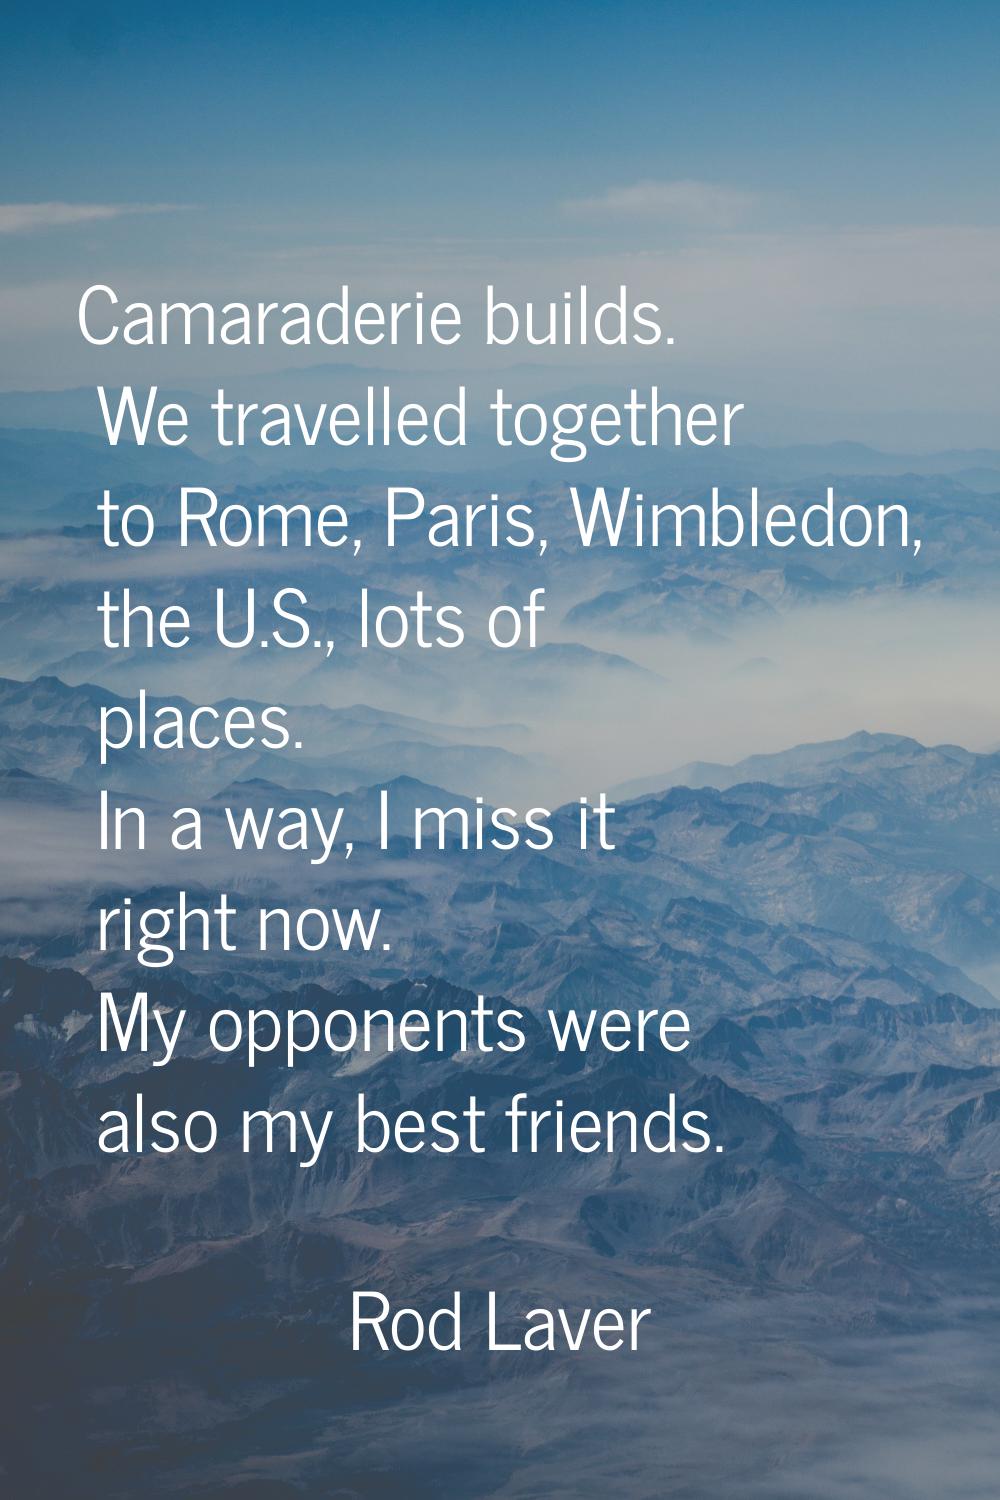 Camaraderie builds. We travelled together to Rome, Paris, Wimbledon, the U.S., lots of places. In a